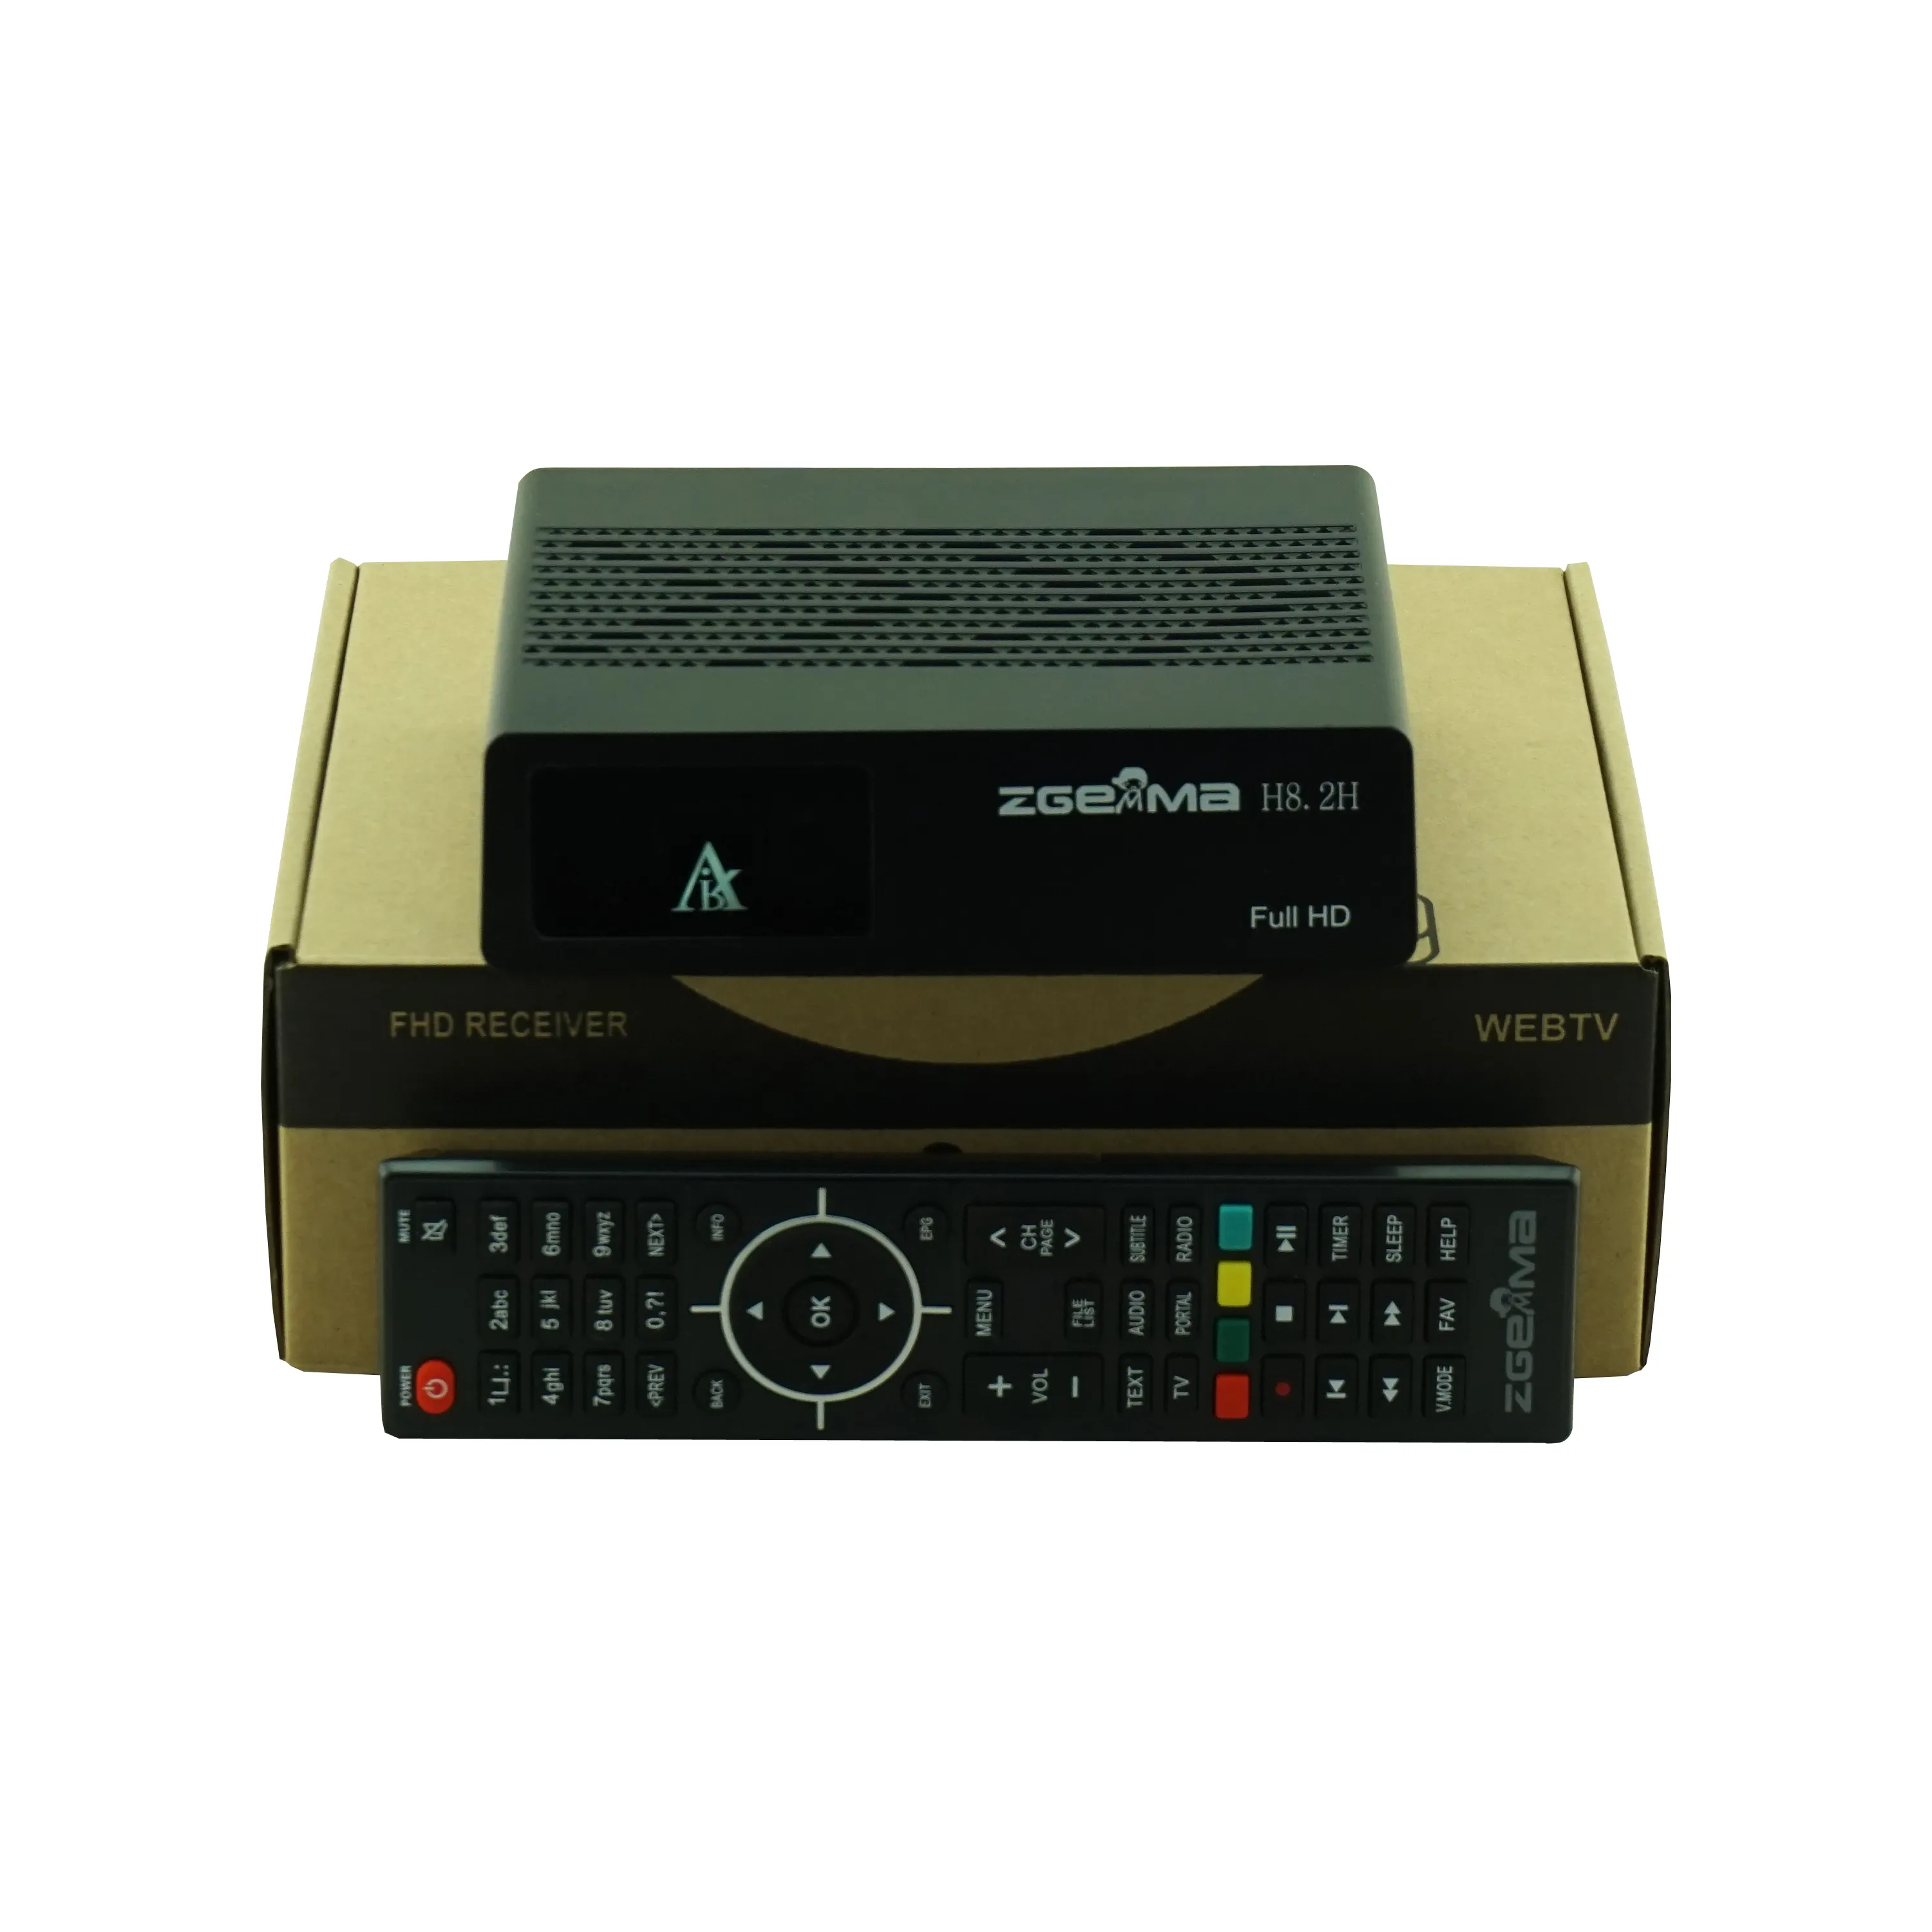 Digital Satellite Tv Receiver Box 1080p - H8.2H Linux Operating System DVB-S2X + DVB-T2/C and Usb Wifi Support